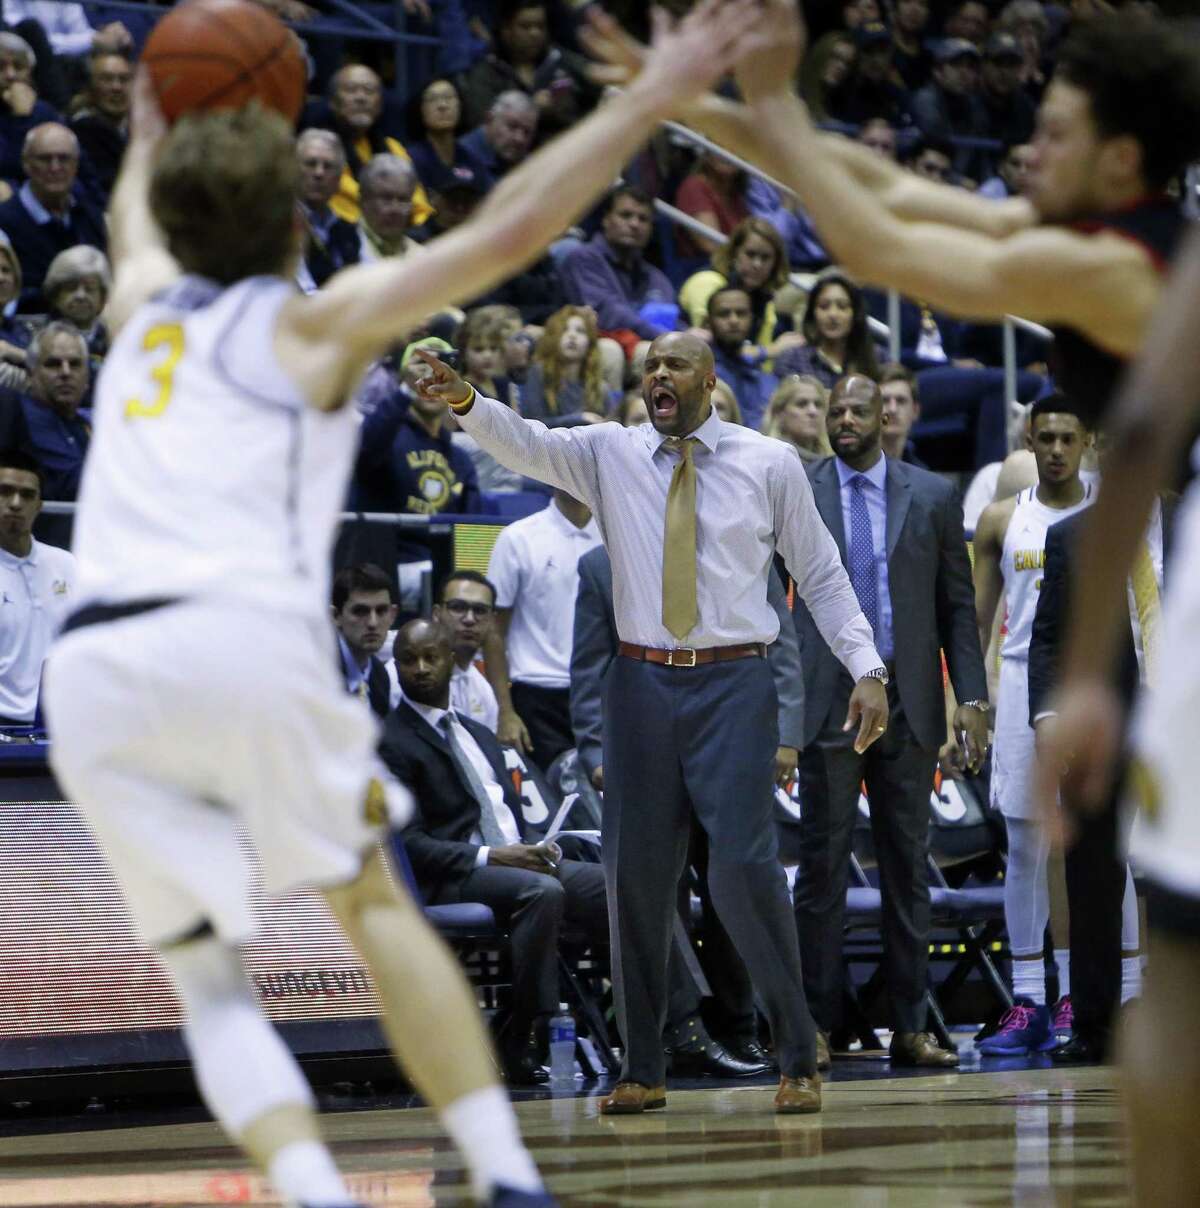 California head coach Cuonzo Martin during Cal's 77-75 double overtime win over Utah in Pac12 men's basketball game at Haas Pavilion in Berkeley, Calif., on Thursday, February 2, 2017.